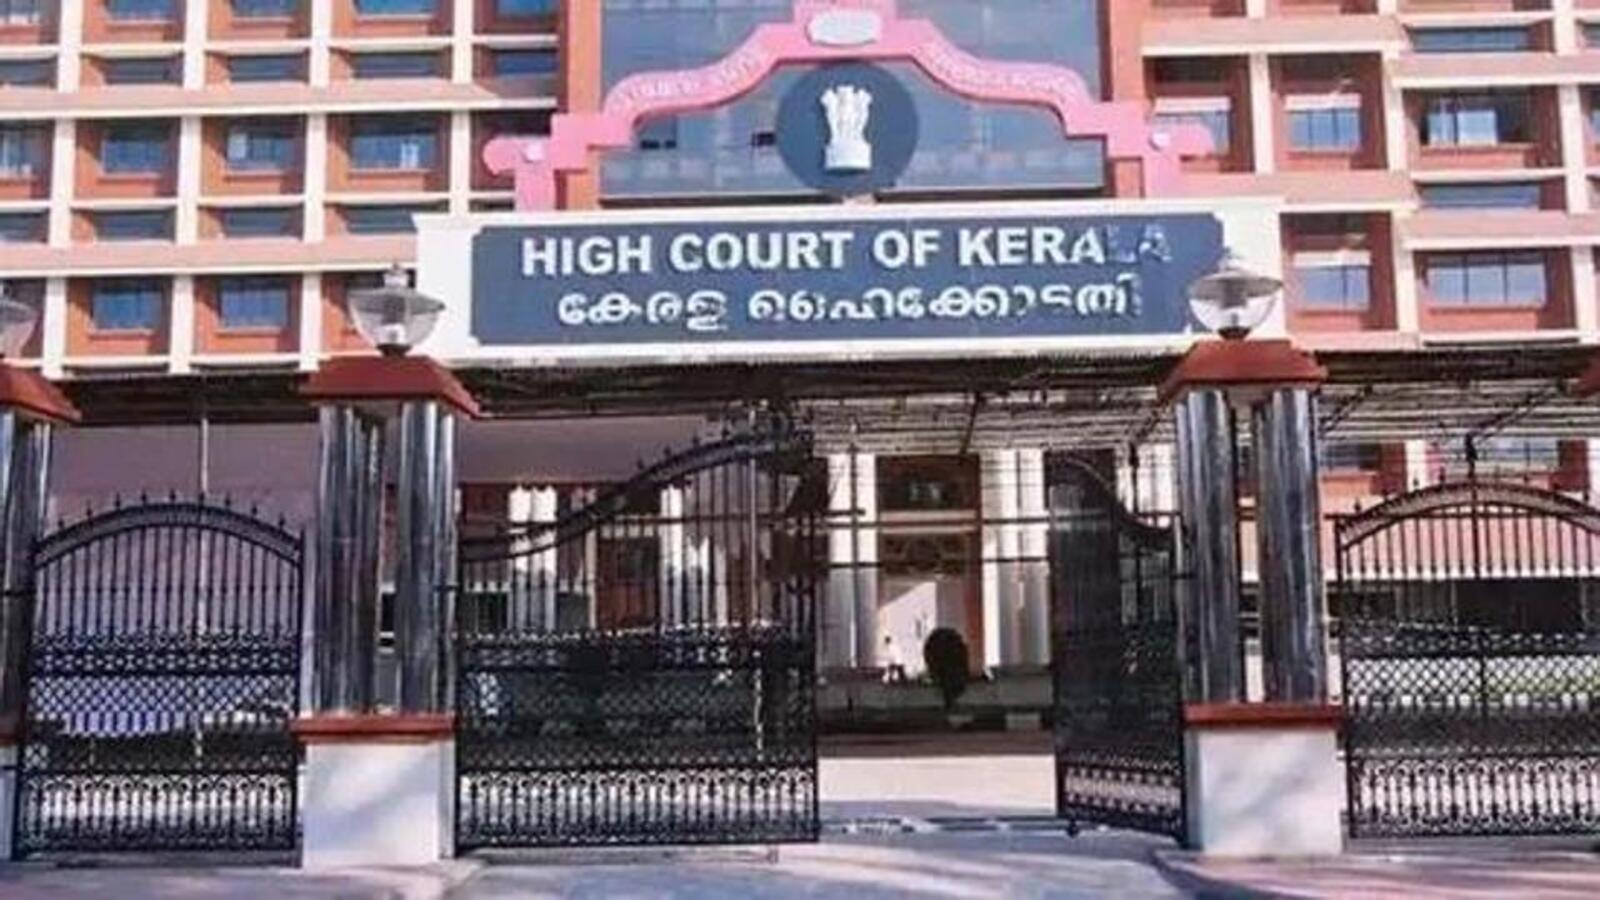 Marriage with minor Muslim girl not excluded from Pocso: Kerala HC | Latest  News India - Hindustan Times